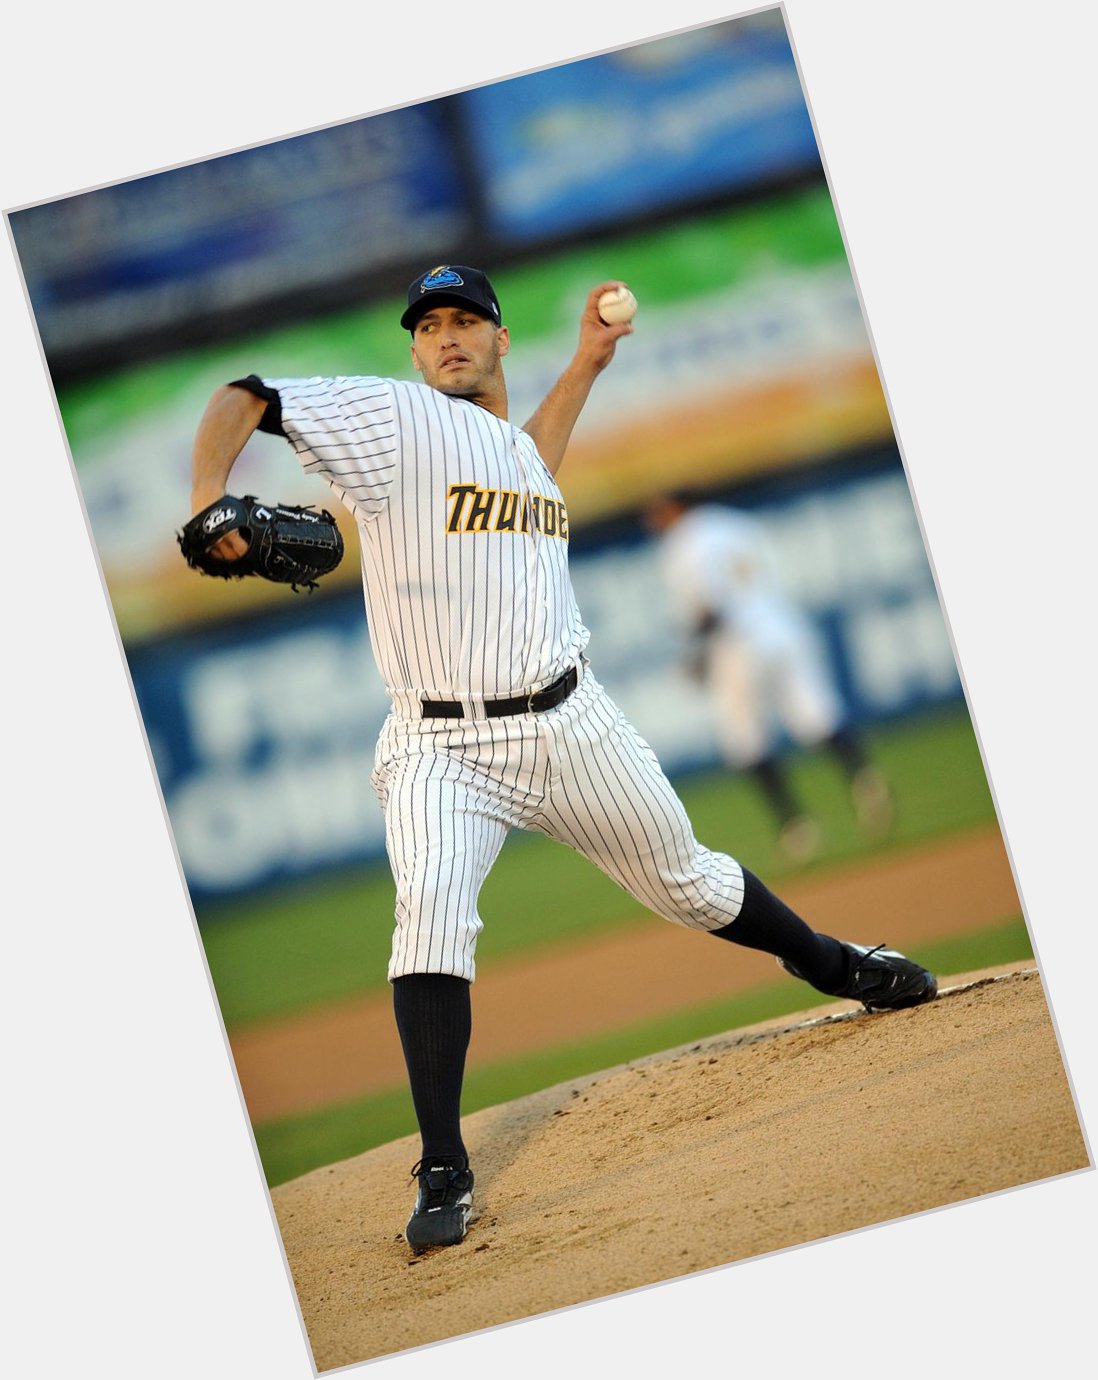 Happy Birthday to a great Yankee... Andy Pettitte.  He pitched for us in 2010 and again in 2012. 